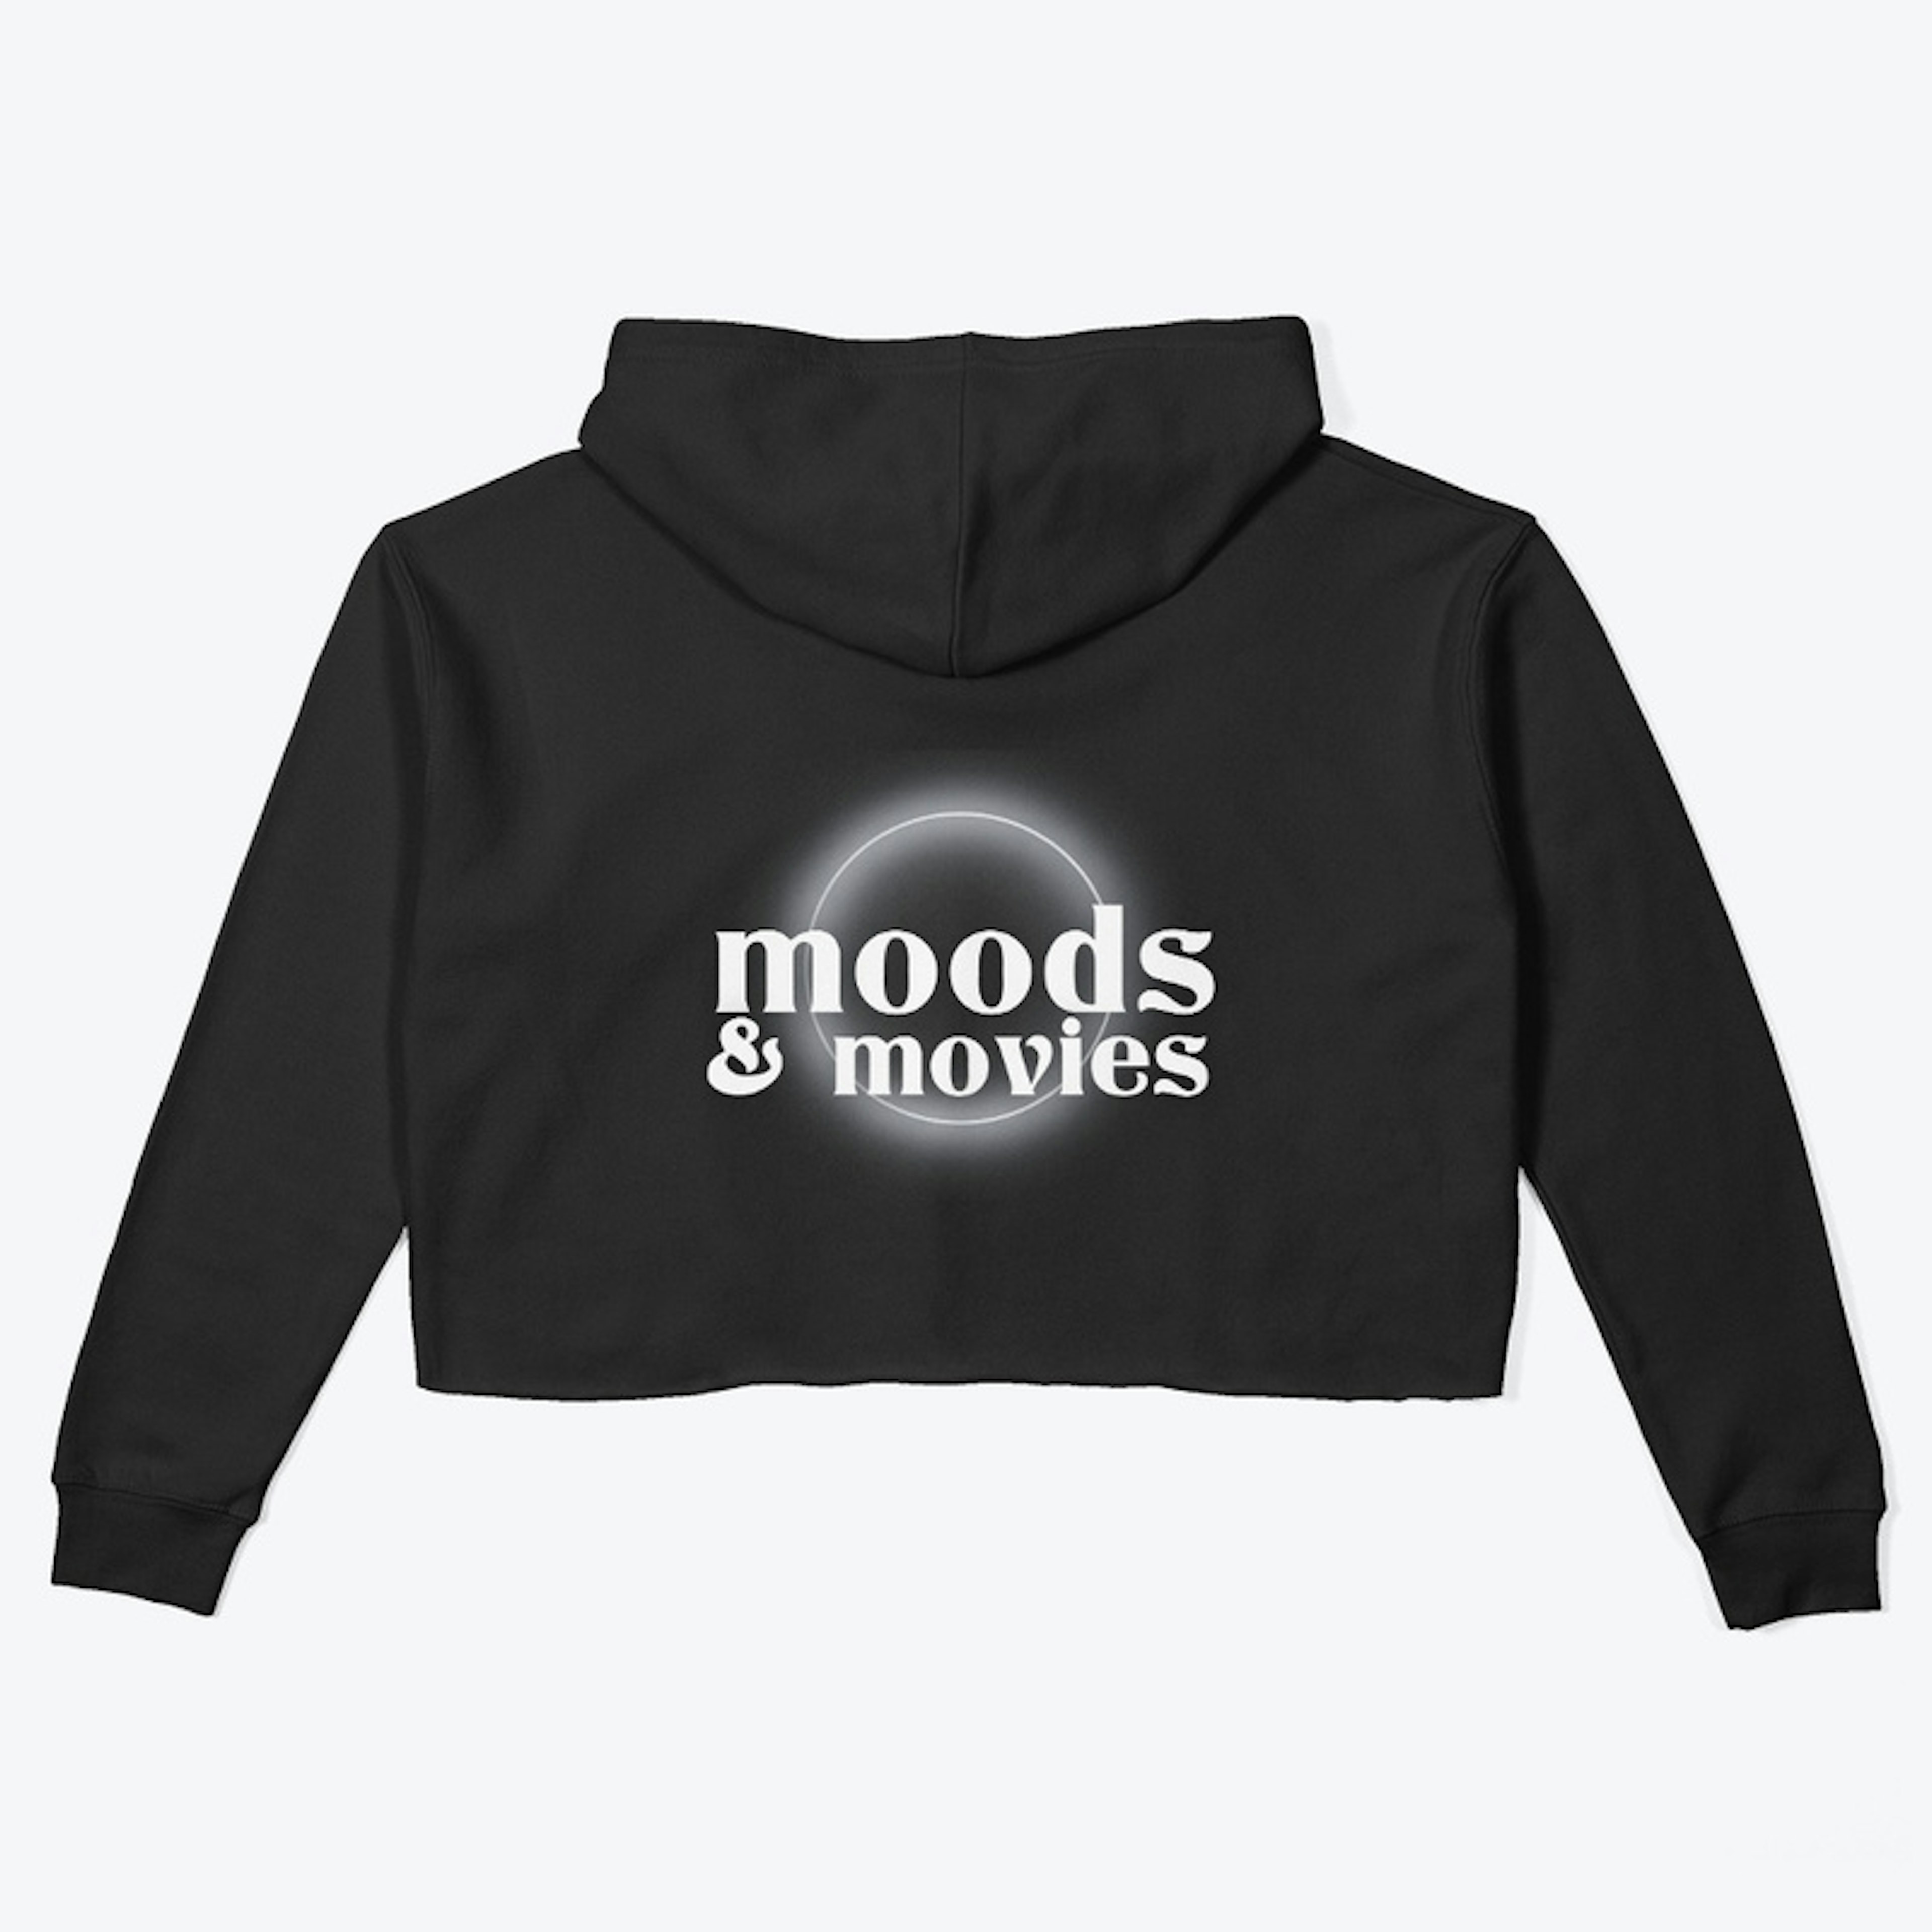 "Seven Days" Mood - AUDFACED Apparel